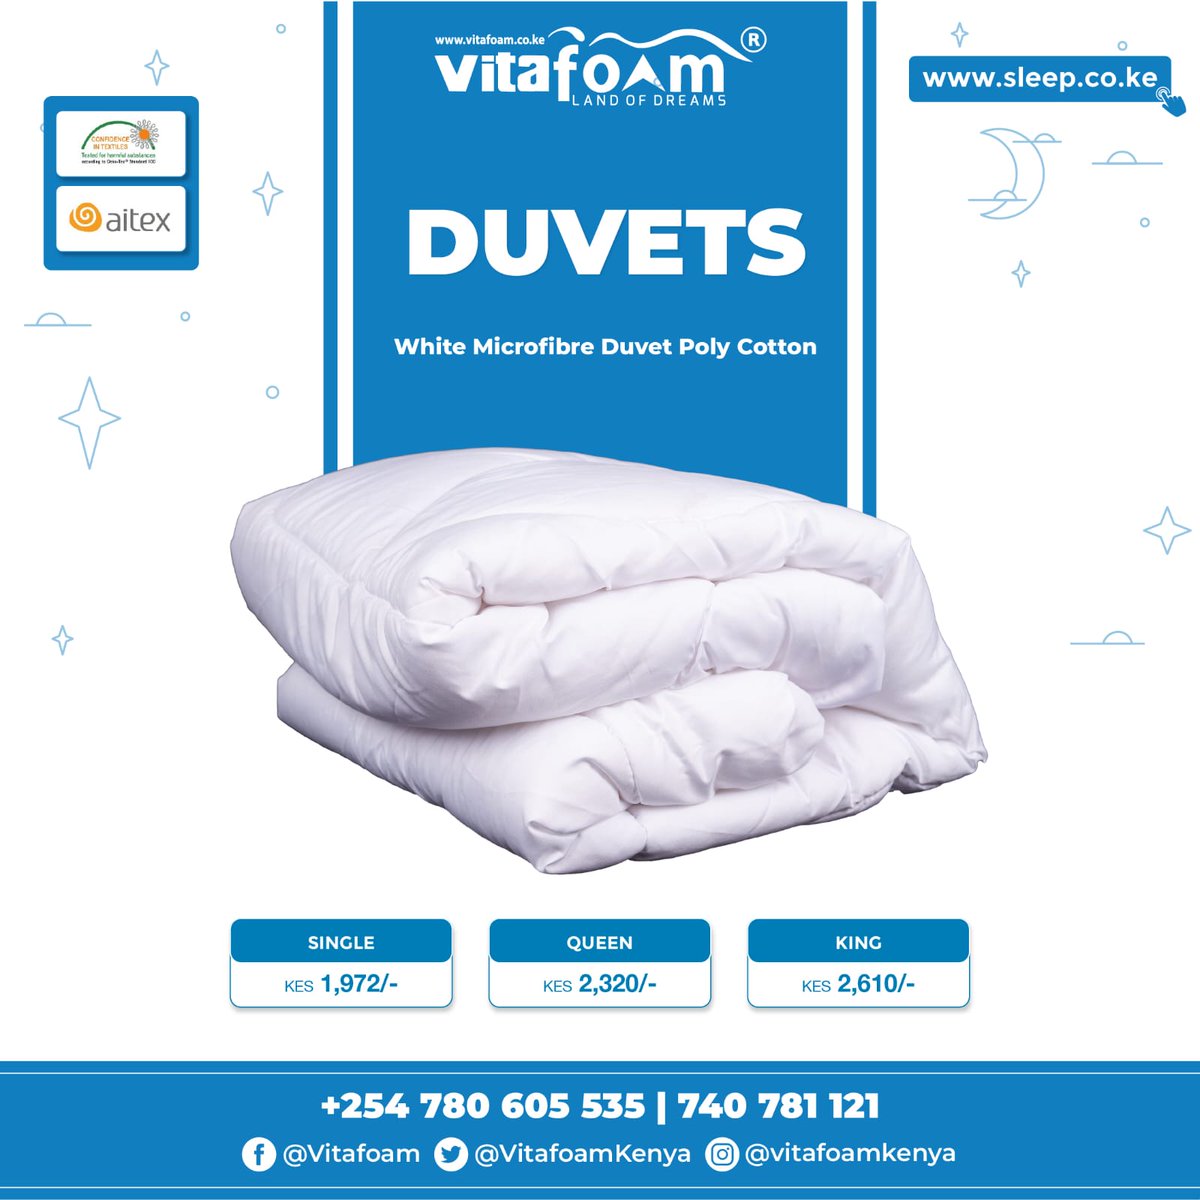 🌟🤗☁️🙋🛌 Experience Ultimate Comfort Whilst You Sleep with our High-Quality #Duvets only from #VitaFoamKenya® 🛏️🙋‍♂️☁️🤗🌟 ☎ For All Sleep Product *Enquiries, *Orders & *Deliveries: 0780 605 535 | 784 857 121 | 740 781 121 📍Our Locations>bit.ly/30VqOrf